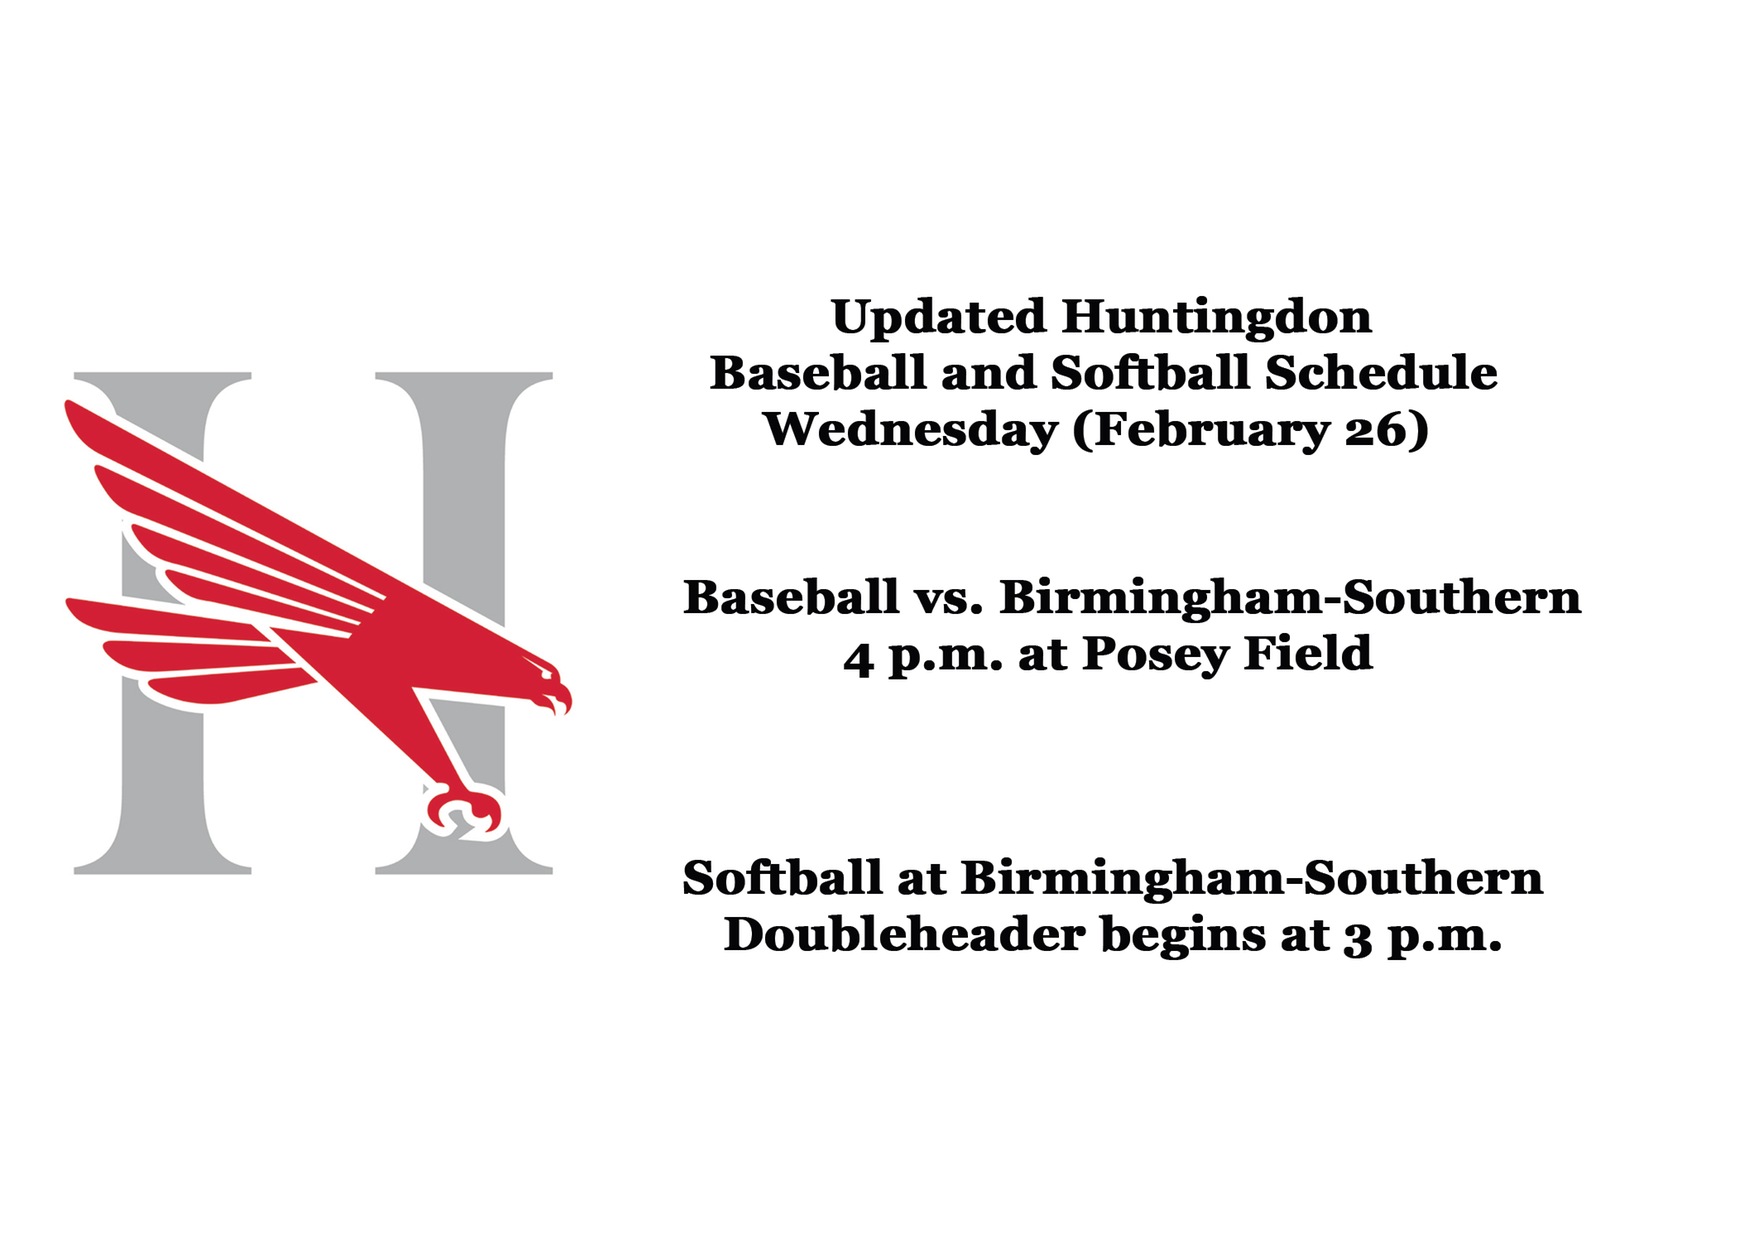 Baseball and softball schedule changes